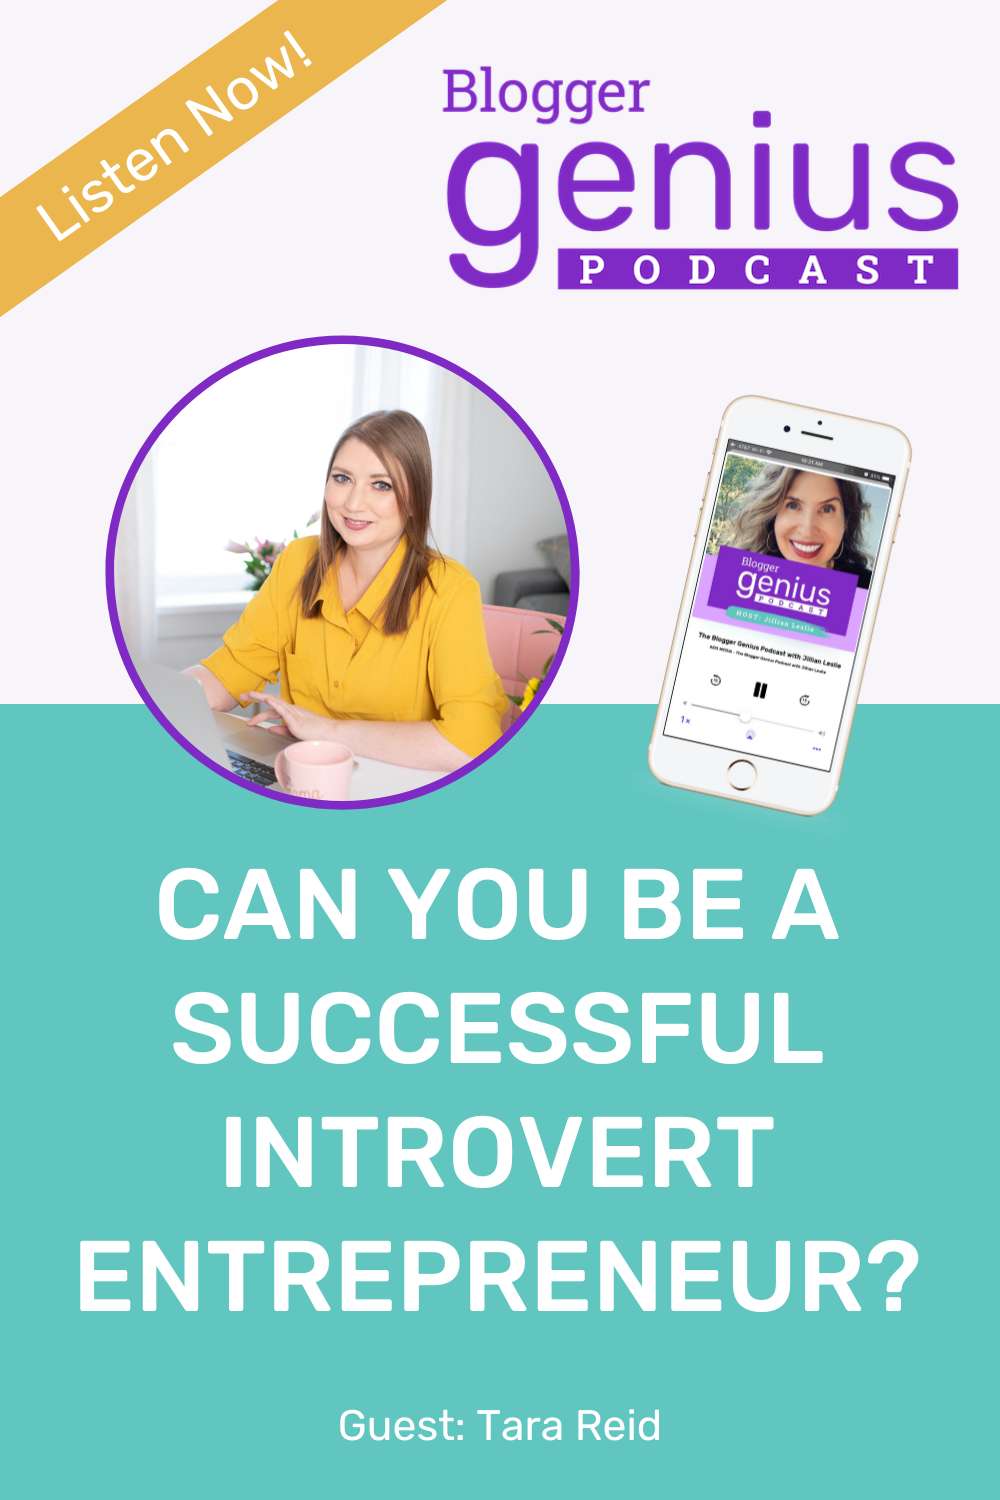 Can You Be a Successful Introverted Entrepreneur? | The Blogger Genius Podcast with Jillian Leslie